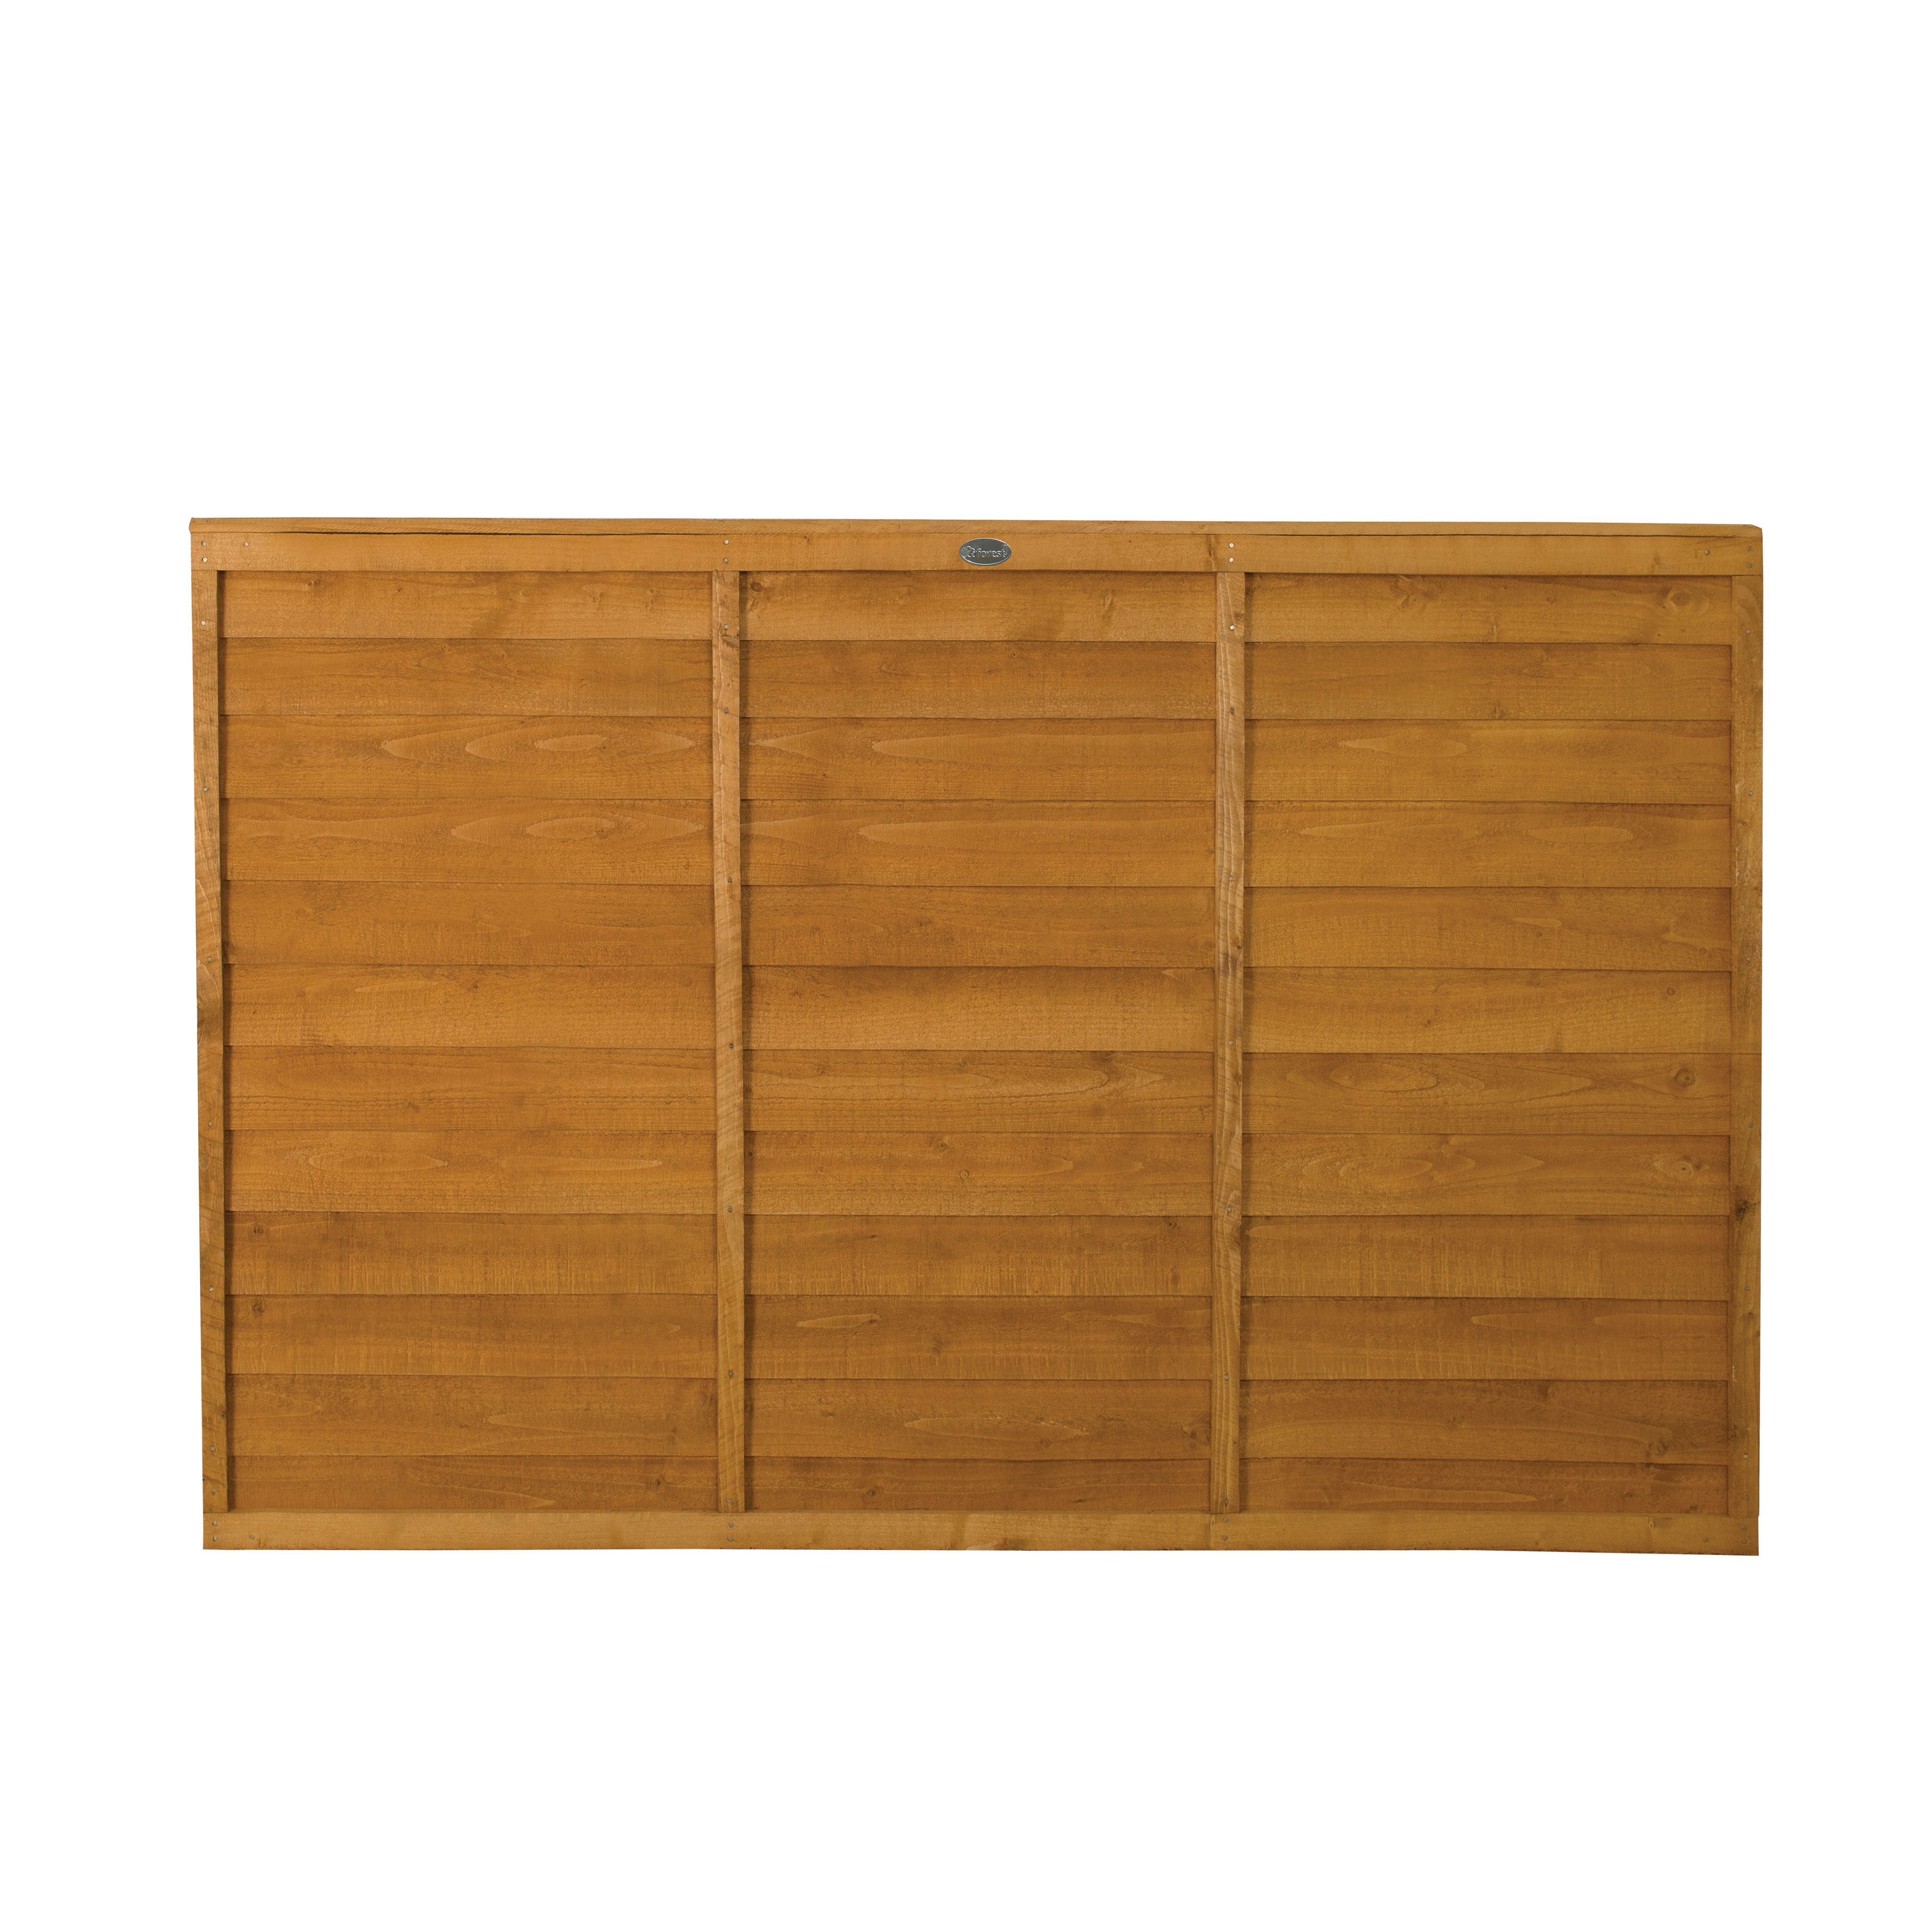 Image of Wickes Dip Treated Overlap Fence Panel - 6 x 4ft